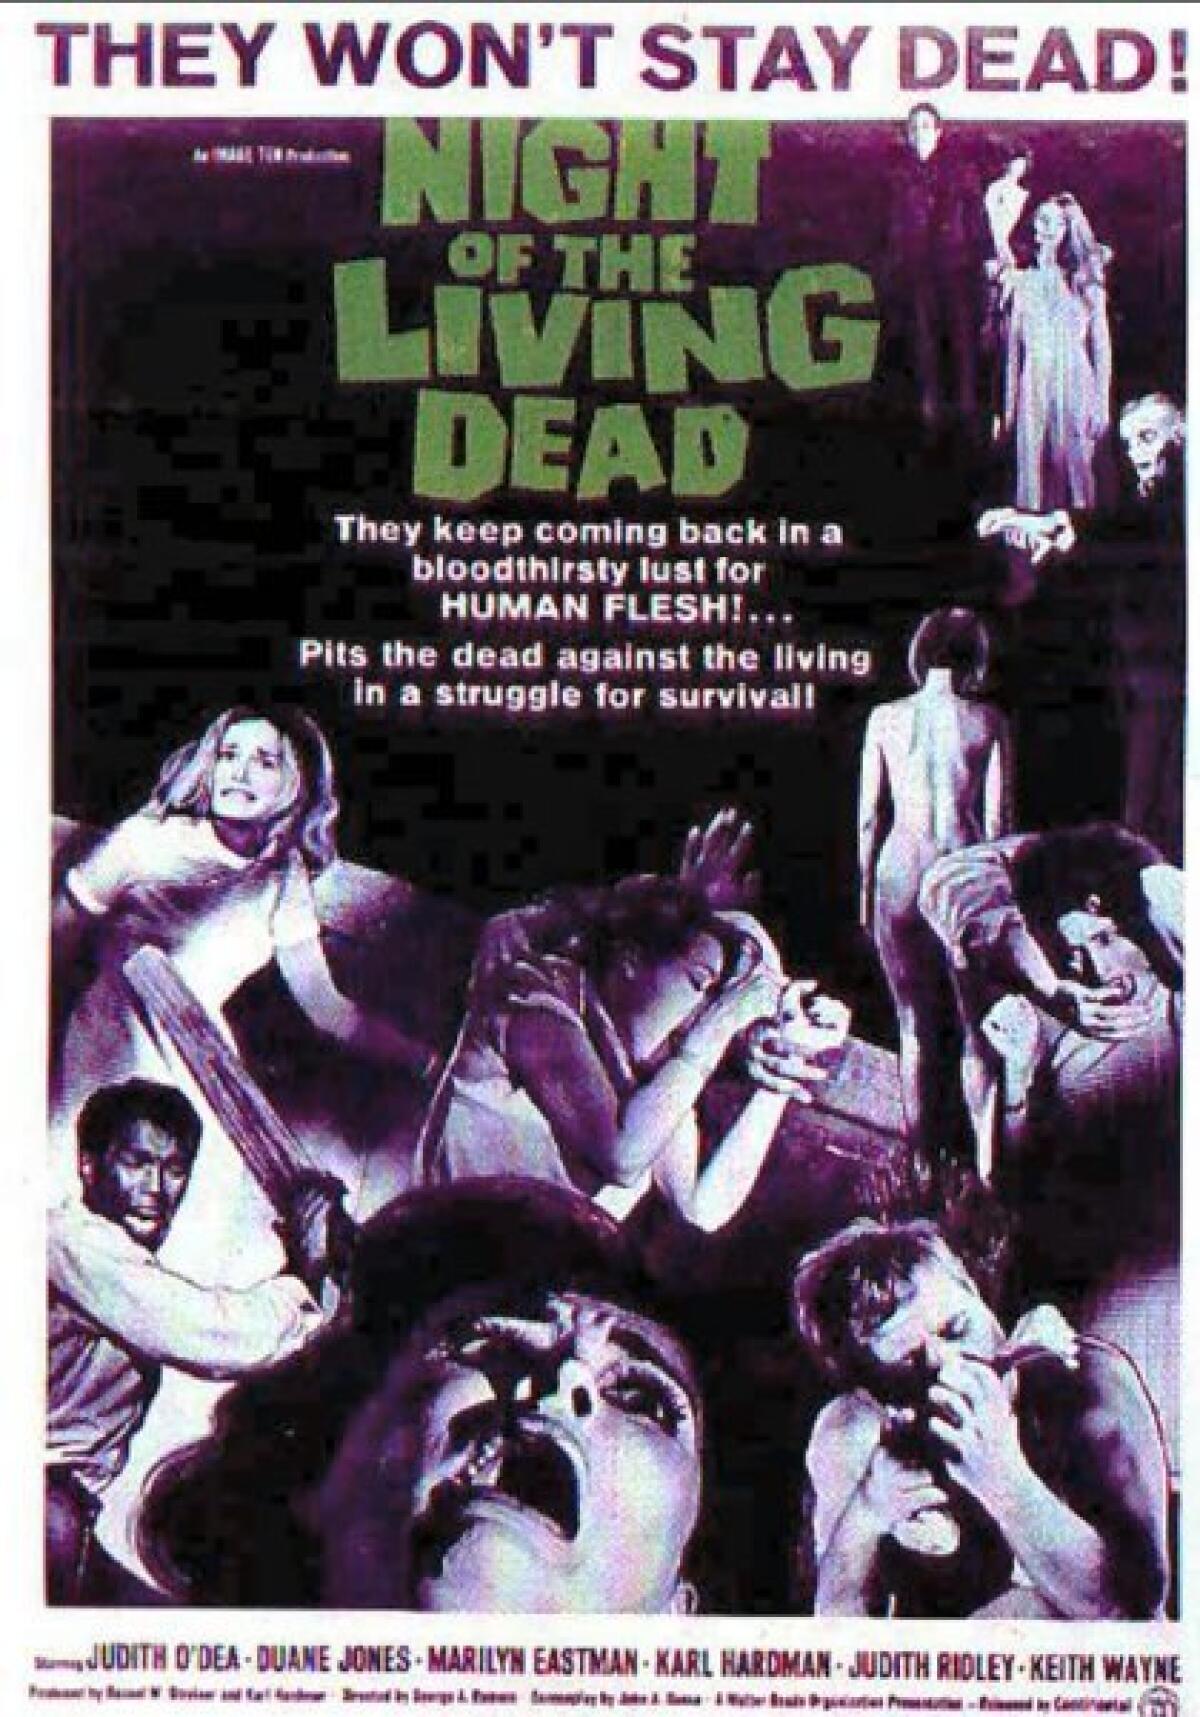 George Romero's classic 1968 film "Night of the Living Dead" influenced the development of many TV shows and movies, including AMC's "The Walking Dead." Wikipedia Commons